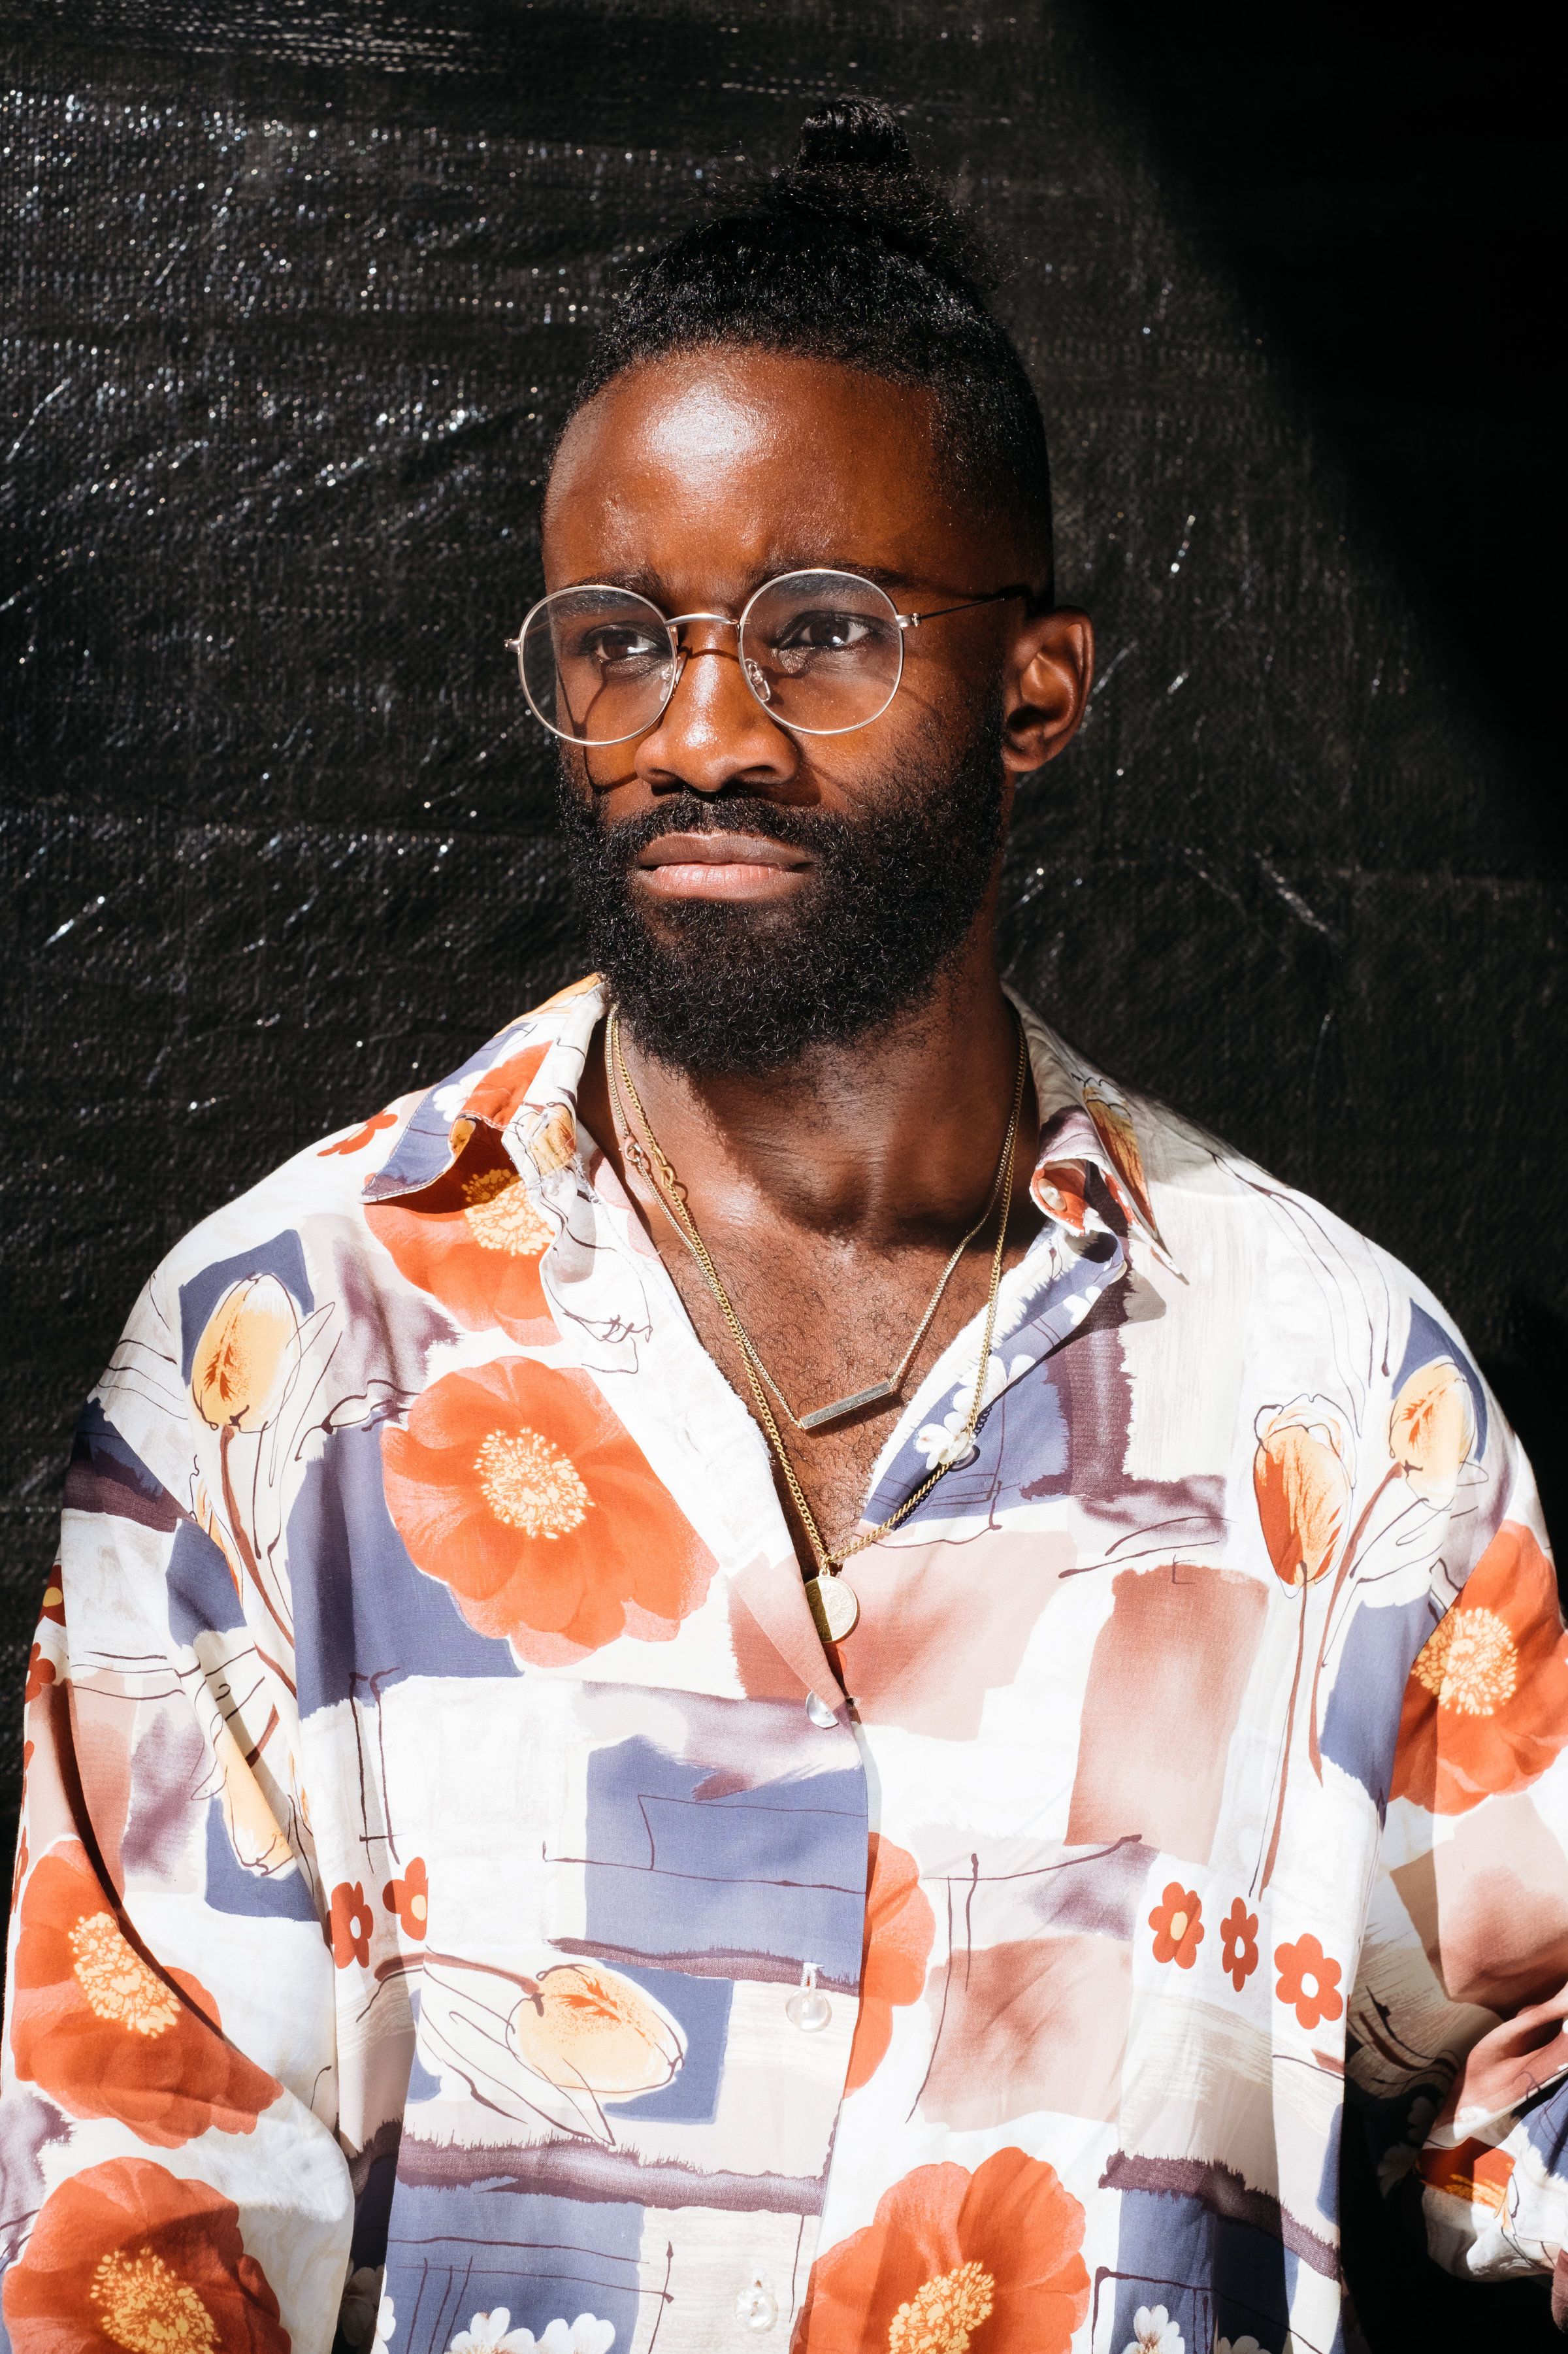 German fashion stylist Cedric, 29, planned on bringing home his experience at Afropunk Fest Paris 2017. "I'm so proud of my color and now I am more proud. I am sad it is finished, but every good thing finishes. Now we are going to do this in Germany." Image by Melissa Bunni Elian. South Africa, 2017.